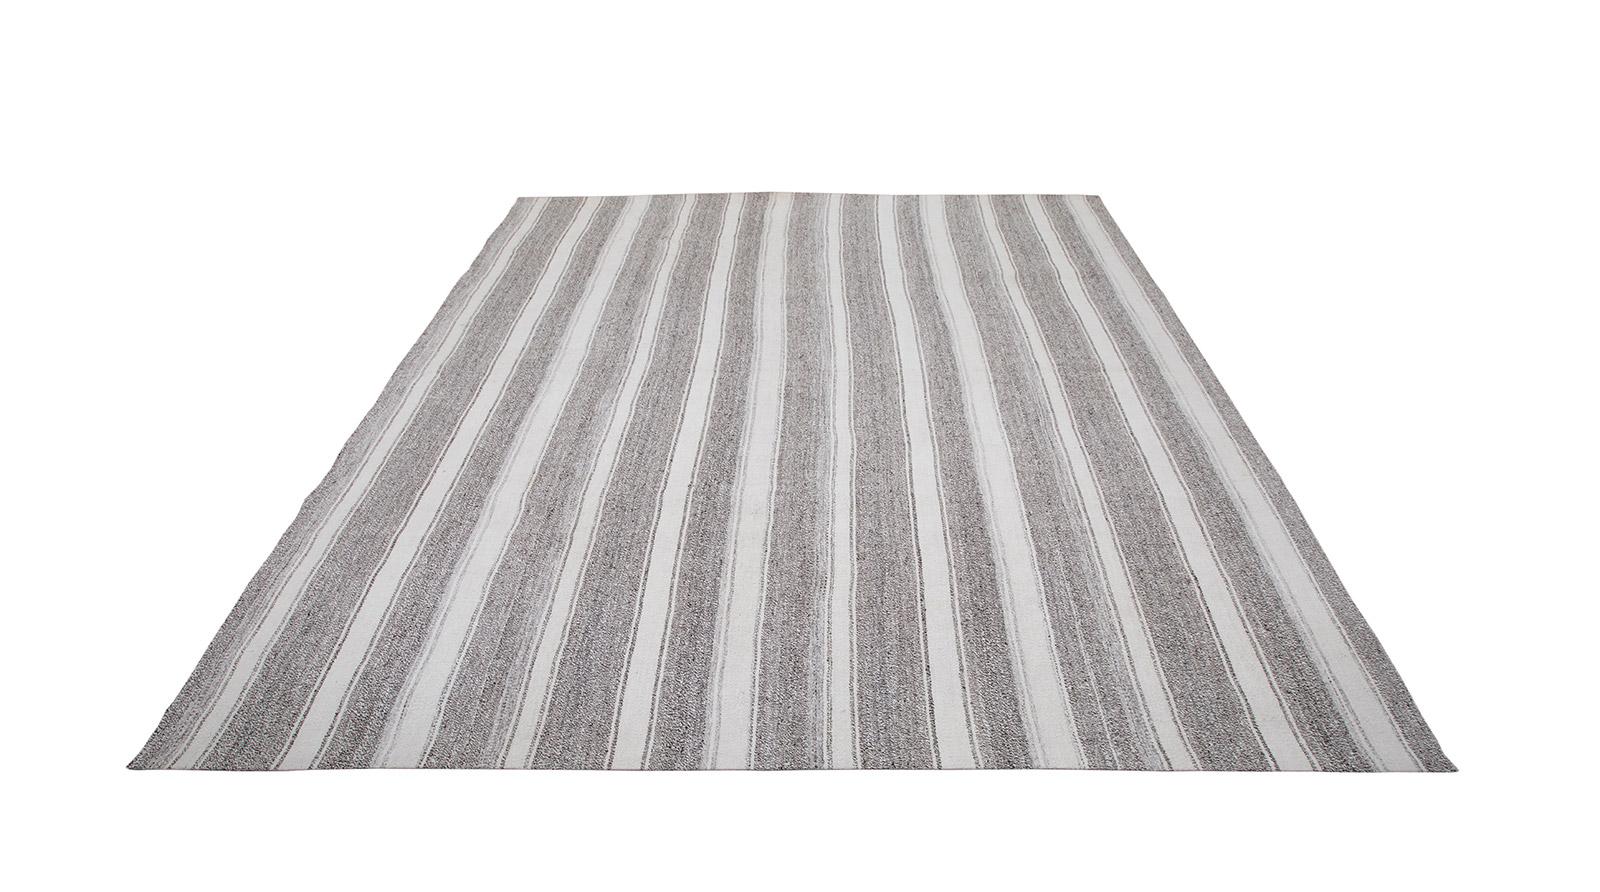 Hand-Woven Vintage Mid-Century Modern Flat-Weave Rug in Warm Grey and White Color For Sale